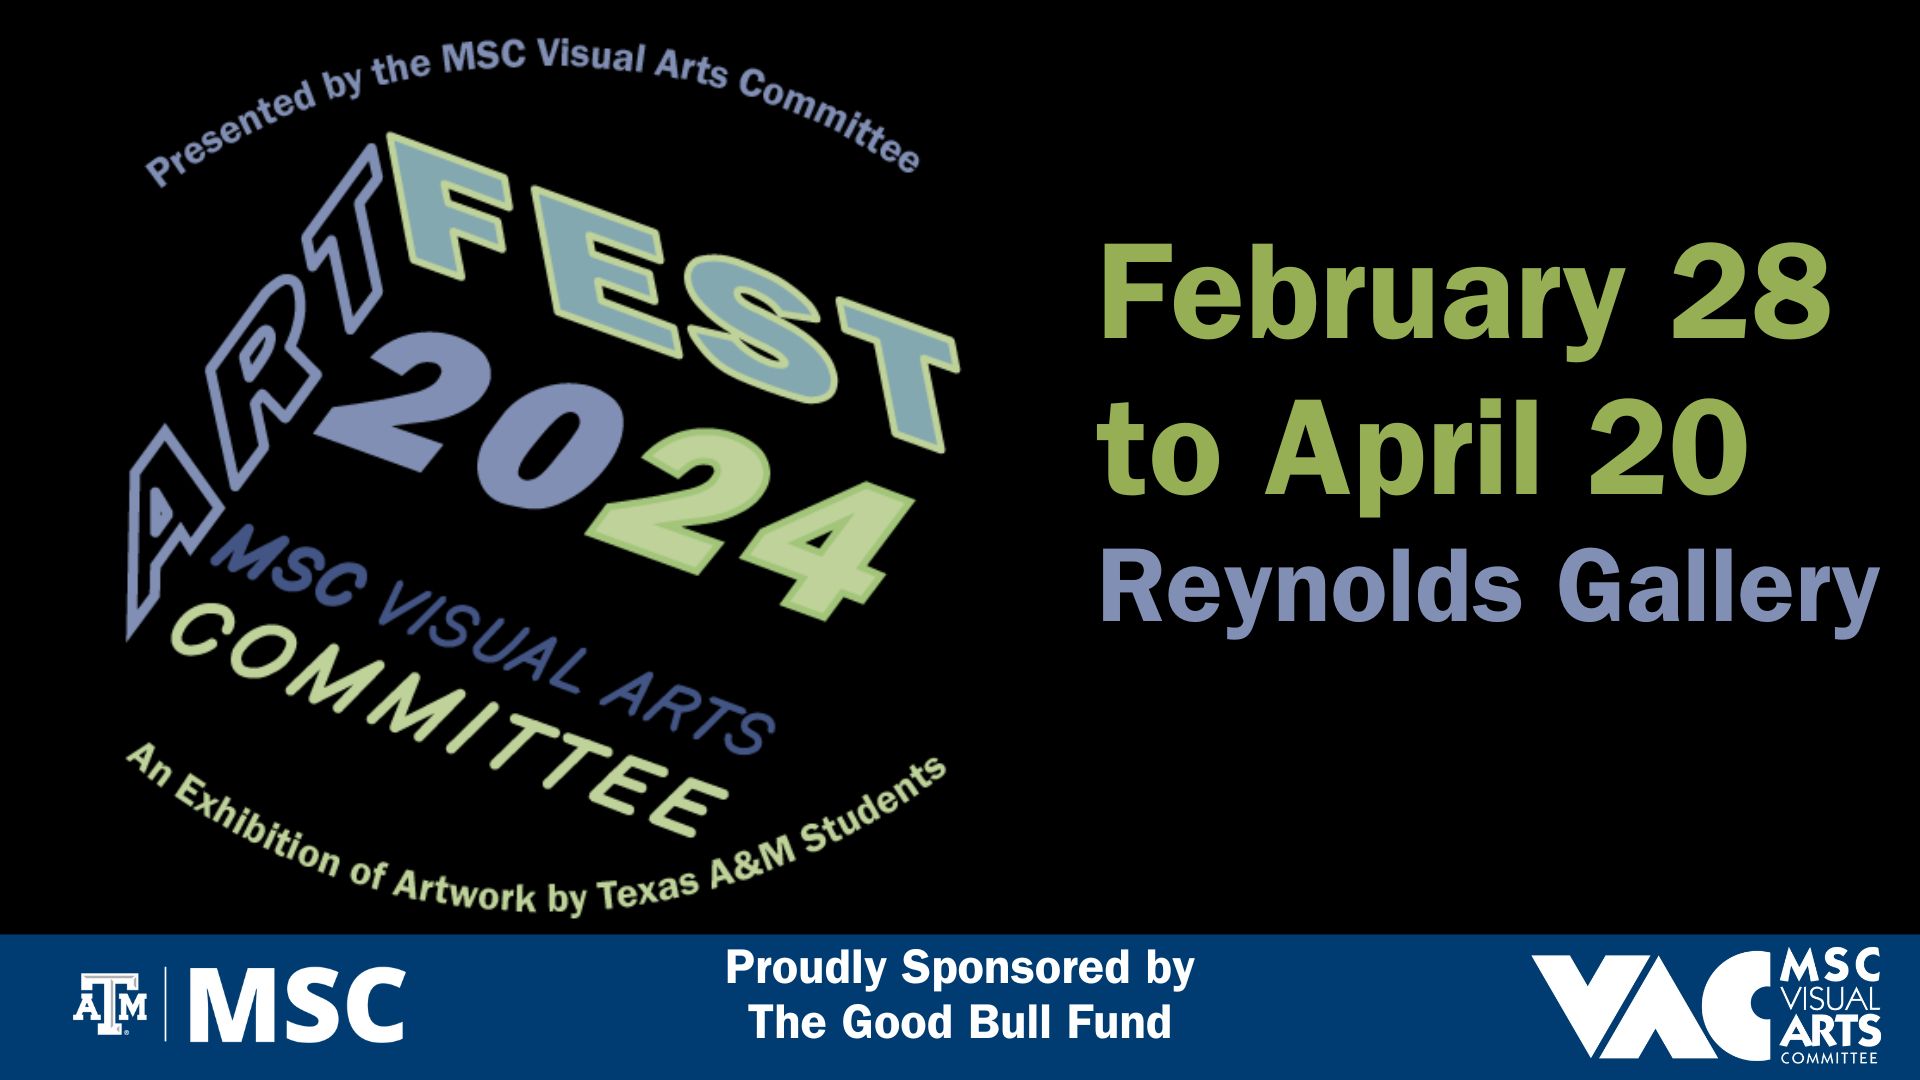 MSC VAC presents ArtFest 2024, proudly sponsored by The Good Bull Fund. February 28 to April 20 at the Reynolds Gallery. An Exhibition of artwork by Texas A&M Students